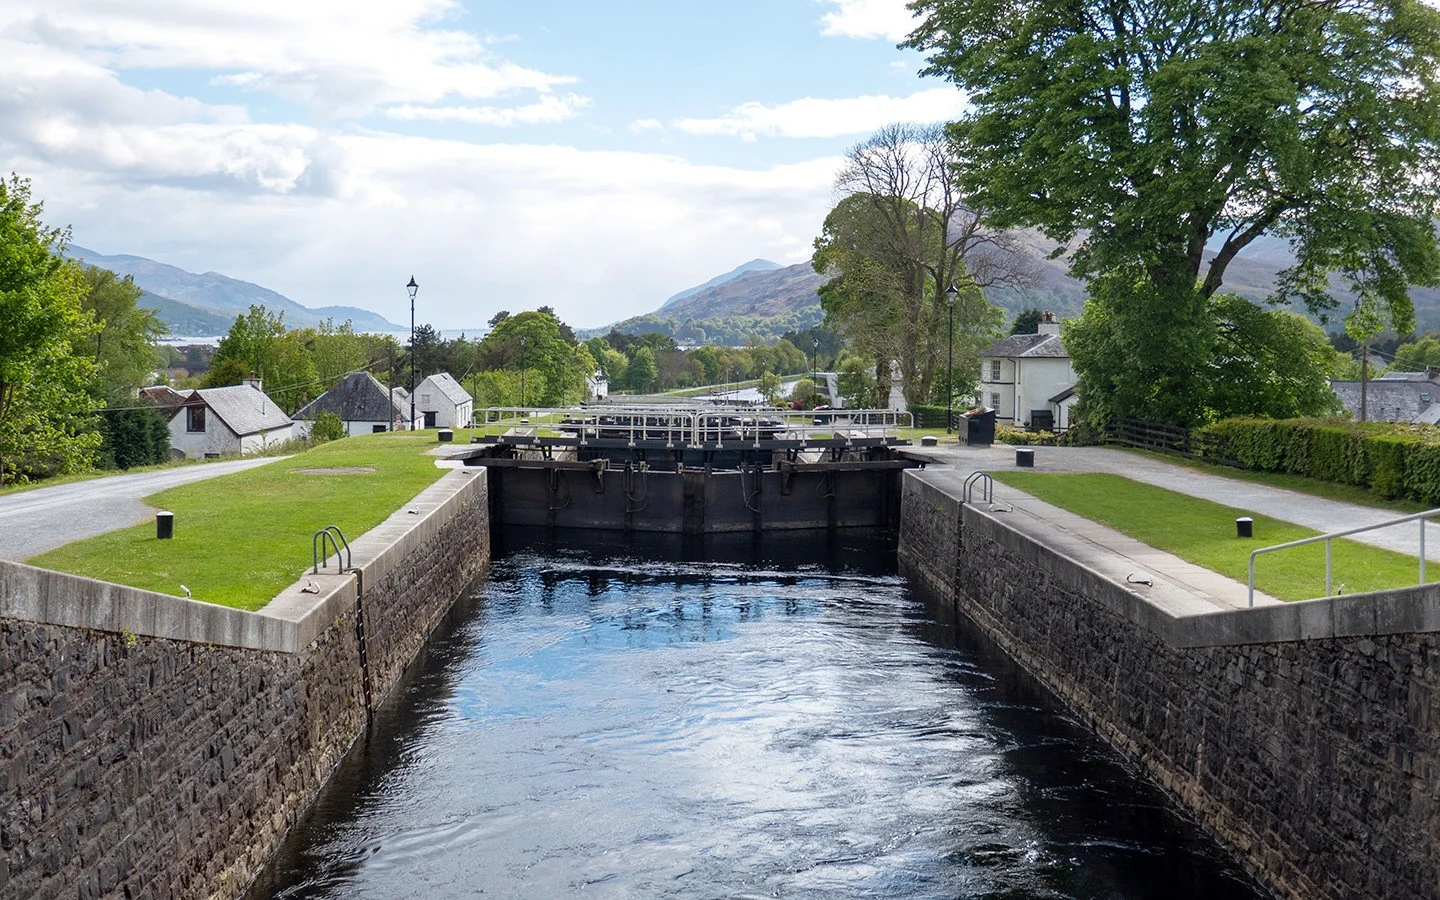 Neptune's Staircase canal locks near Fort William in Scotland